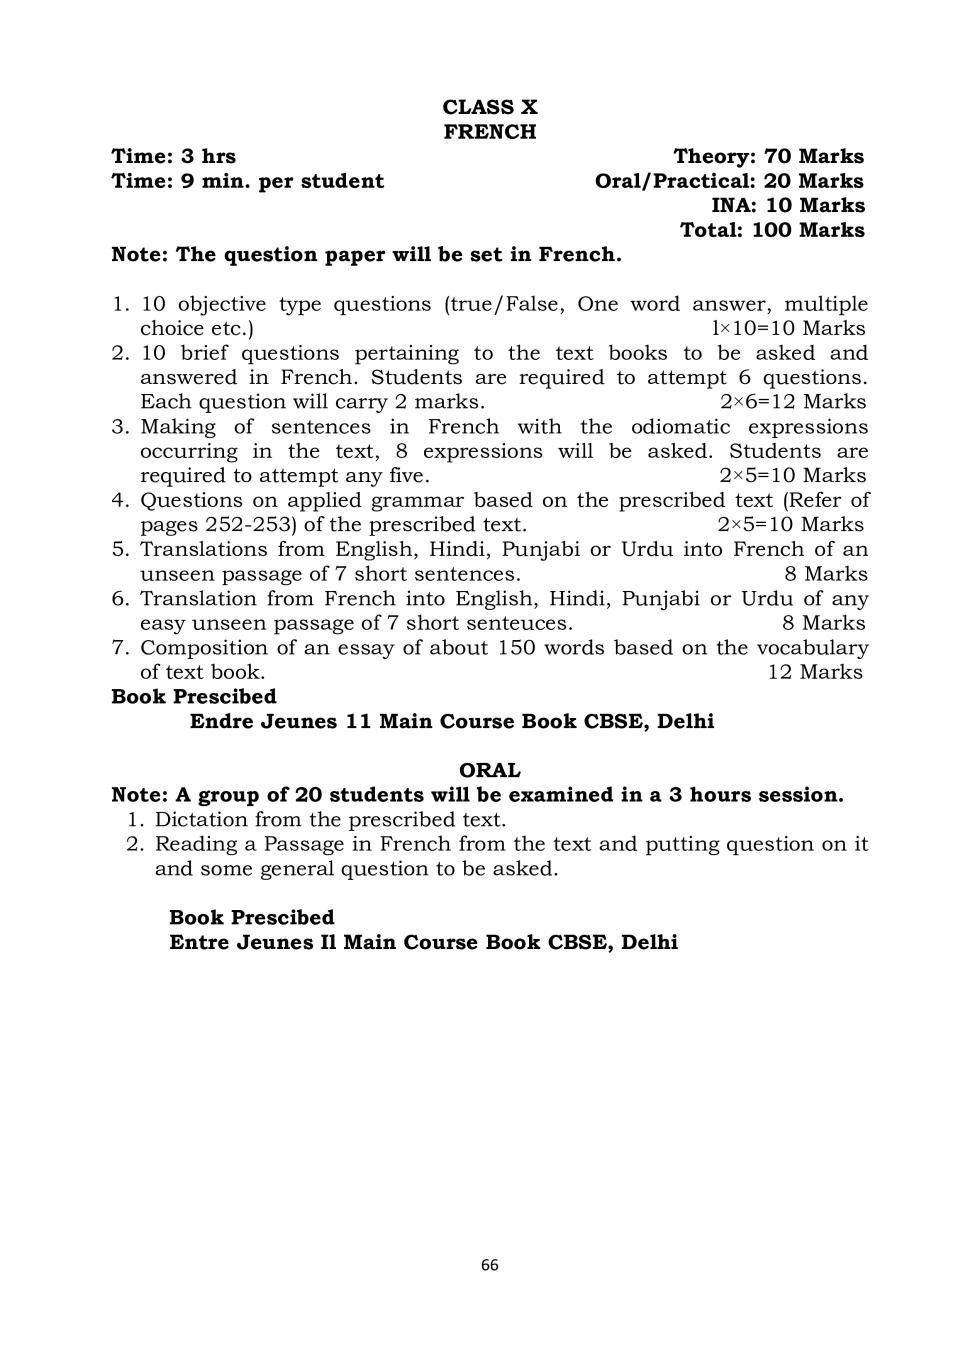 PSEB Syllabus 2020-21 for Class 10 French - Page 1